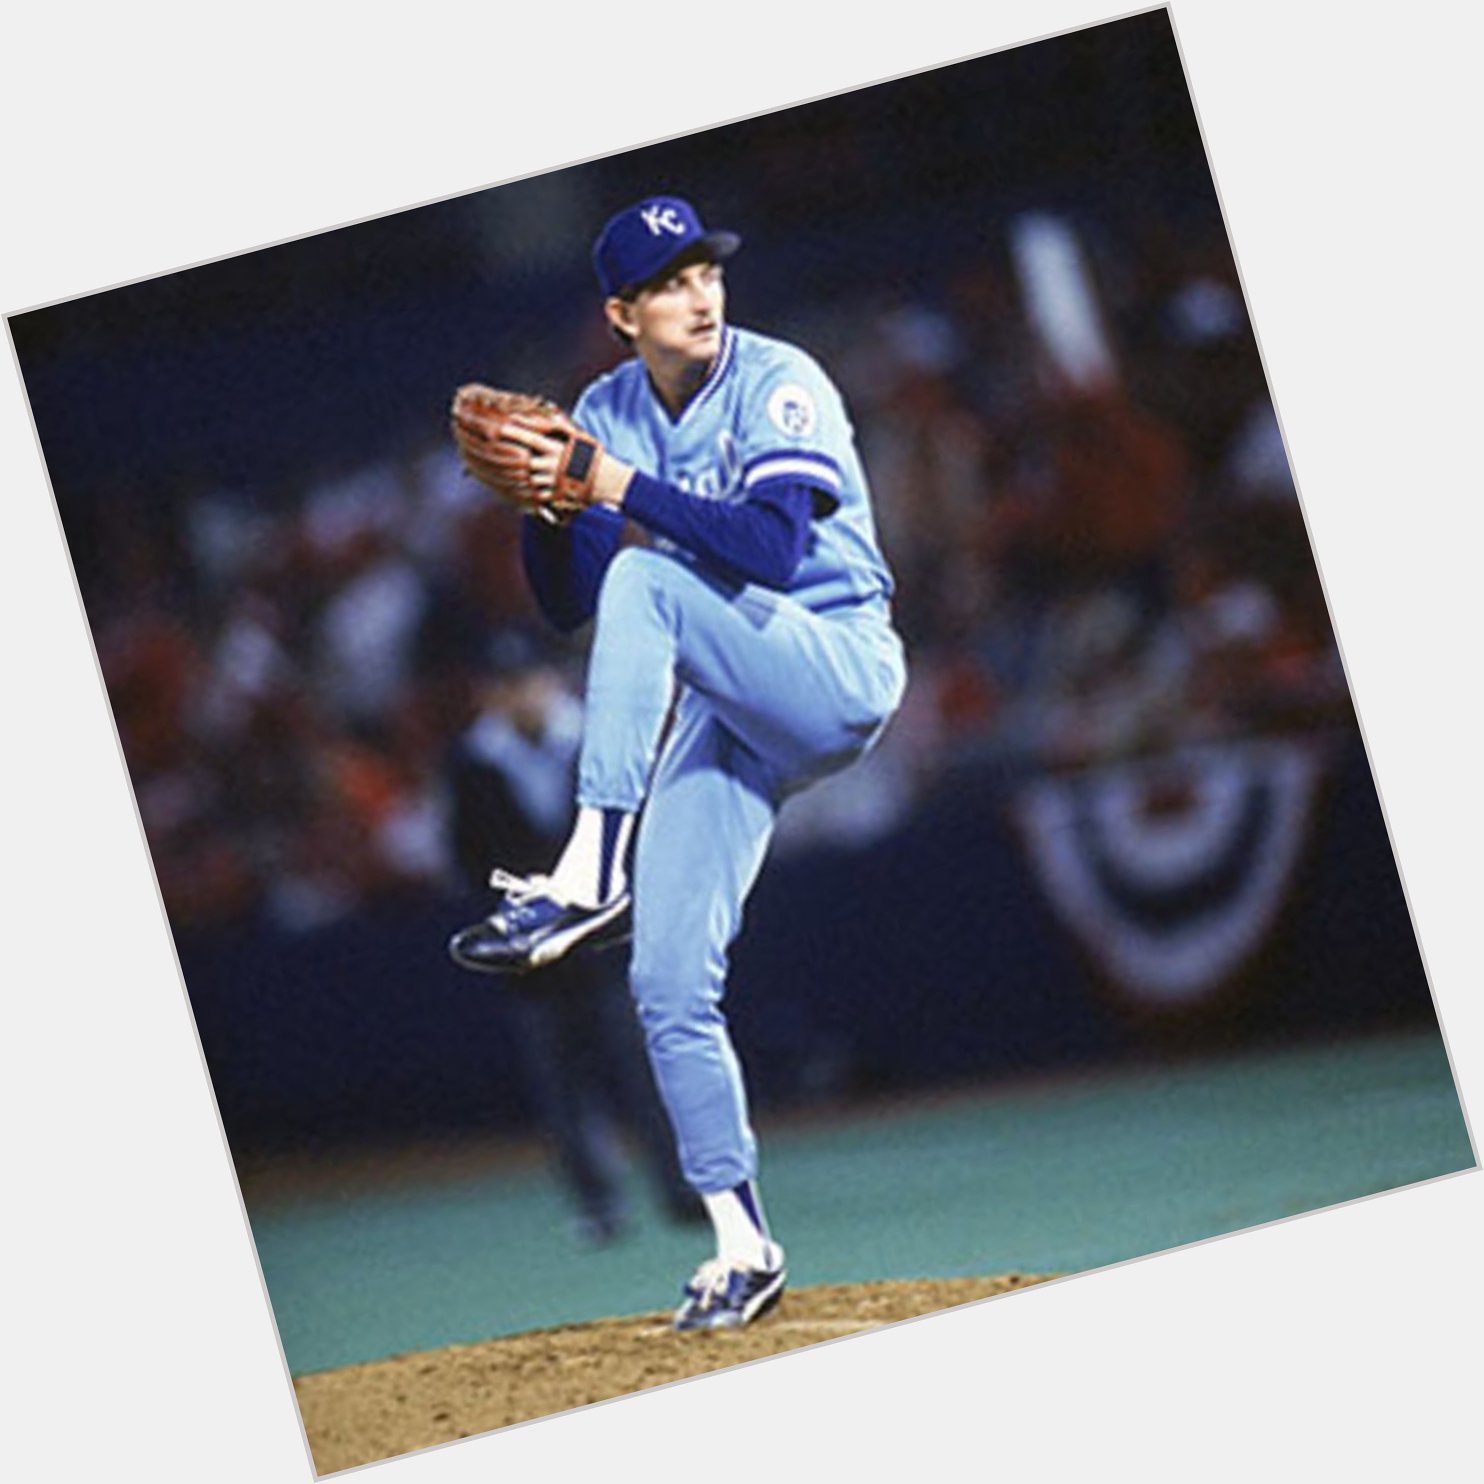 Happy birthday to 1985 World Series MVP and 2 time Cy Young Award winner Bret Saberhagen 